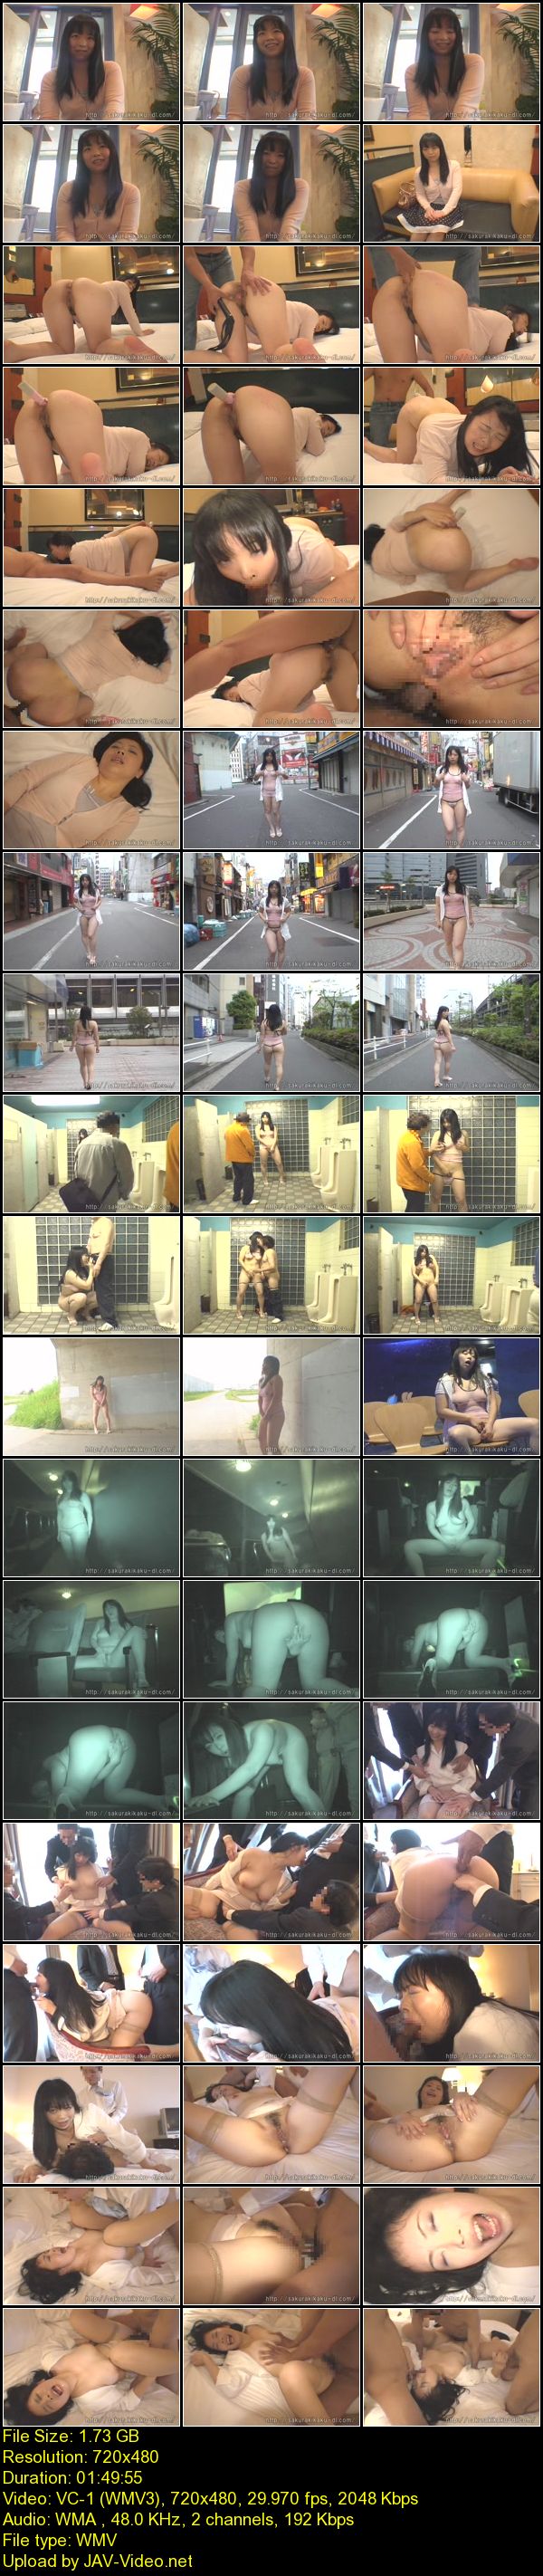 Download Japanese Adult Video [SKND 041] 投稿日記　０４１　あきな 乱交 中出し 3P・4P 羞恥・調教 2009 09 04